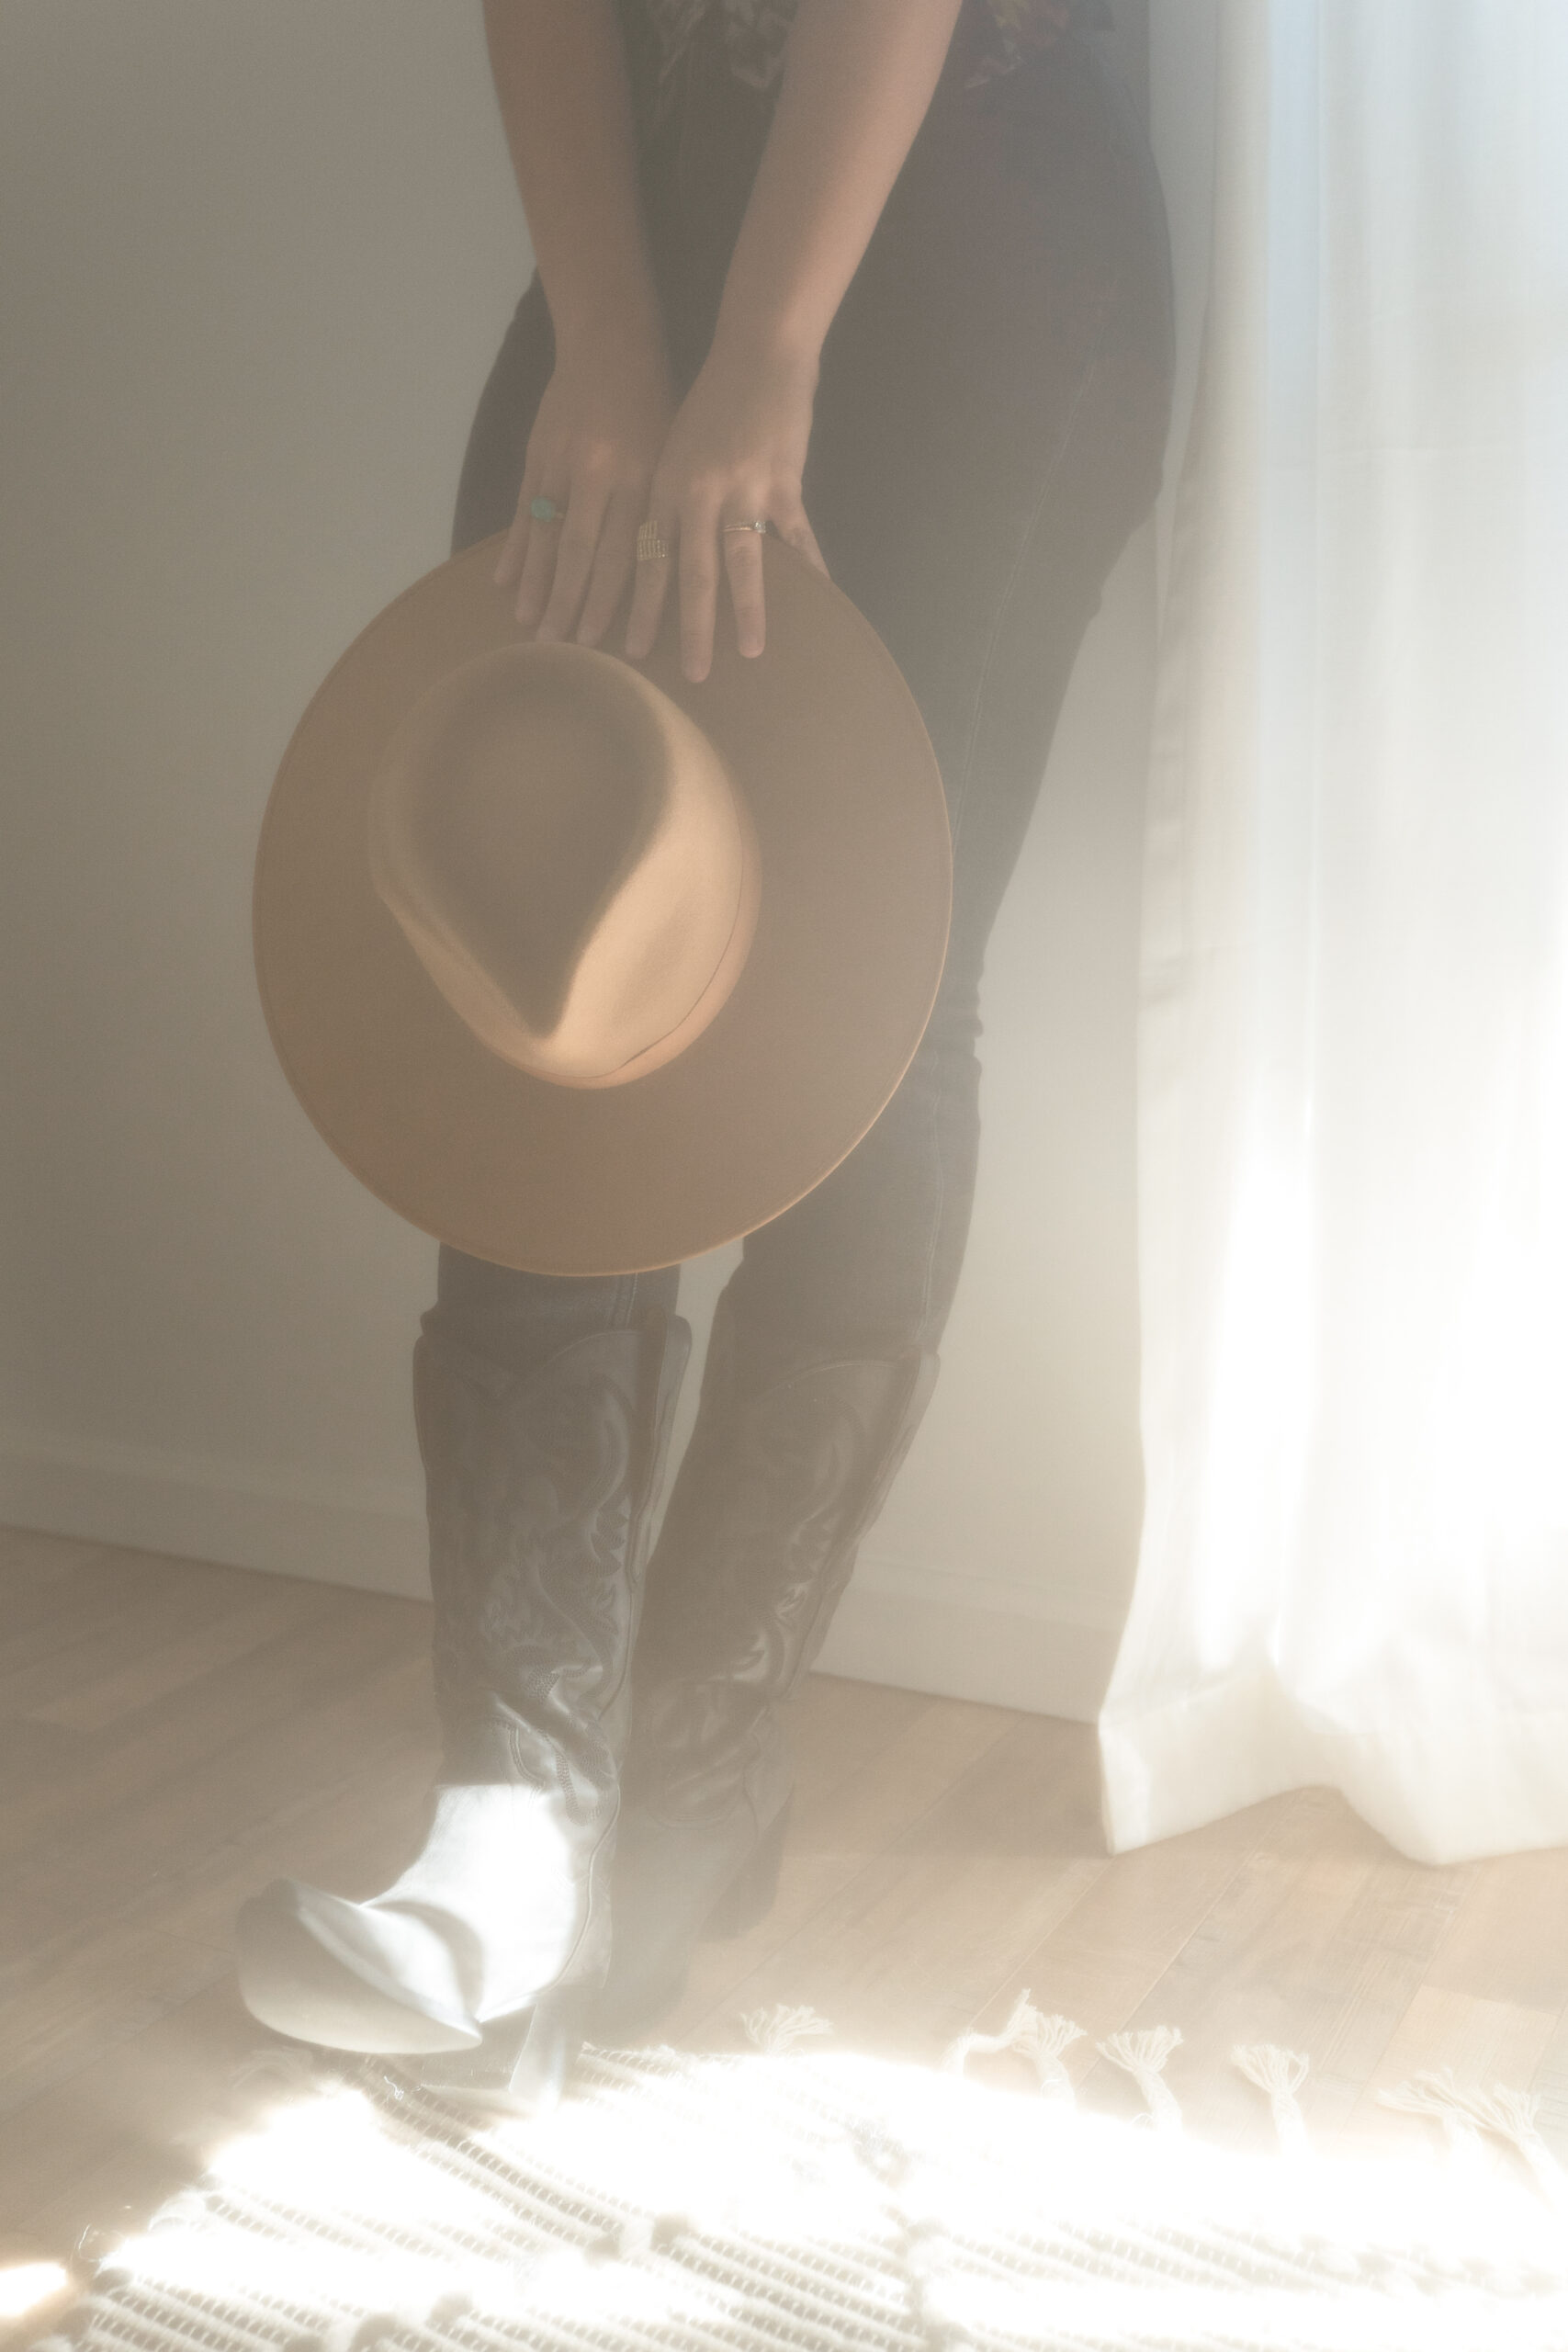 A copywriter holds her hat near her cowboy boots.